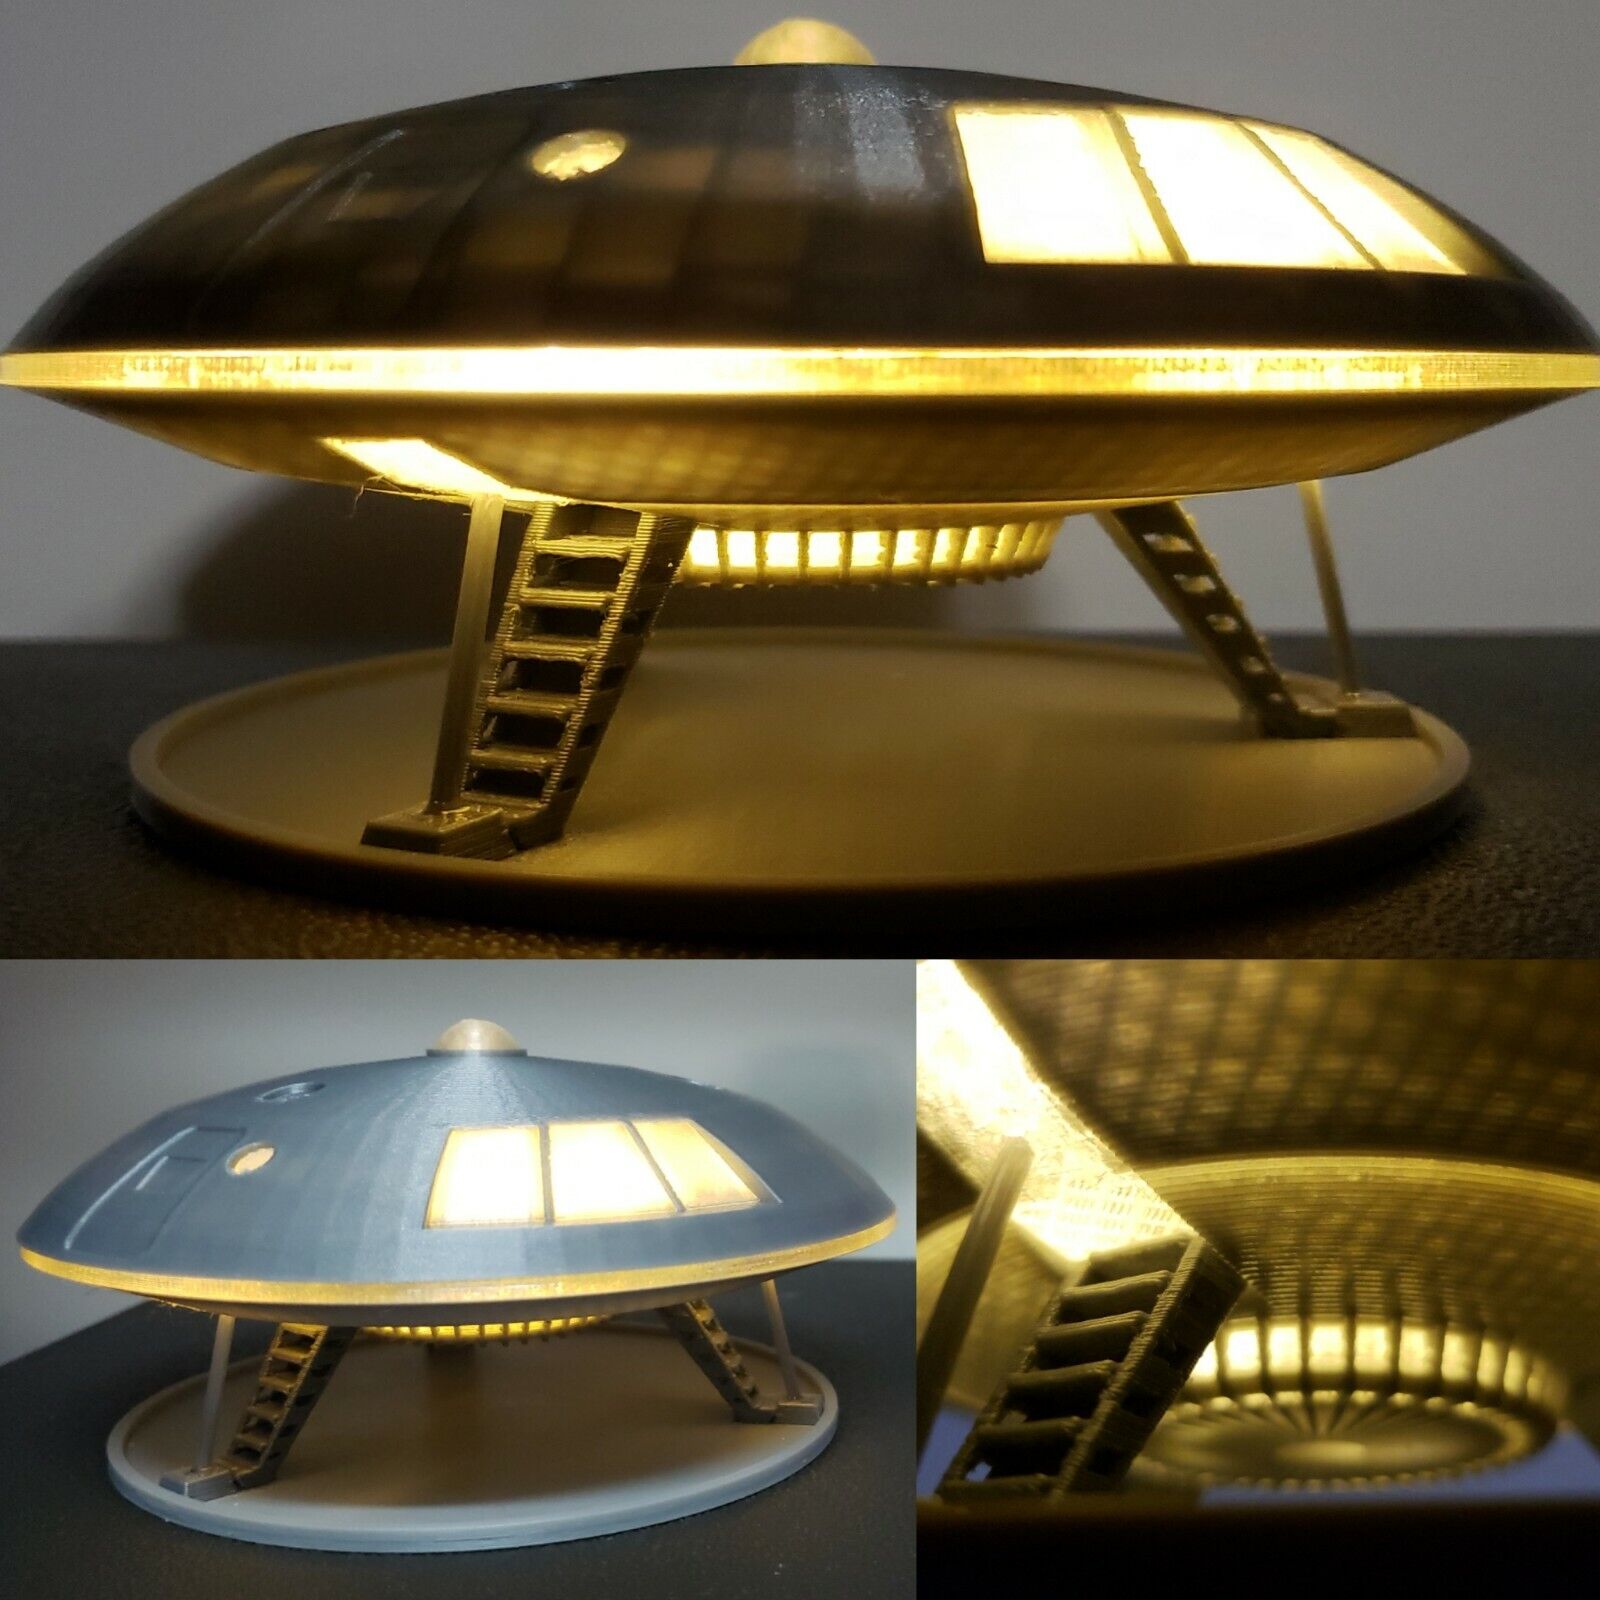 Jupiter 2 [from Lost in Space] - Medium - includes battery-powered lights